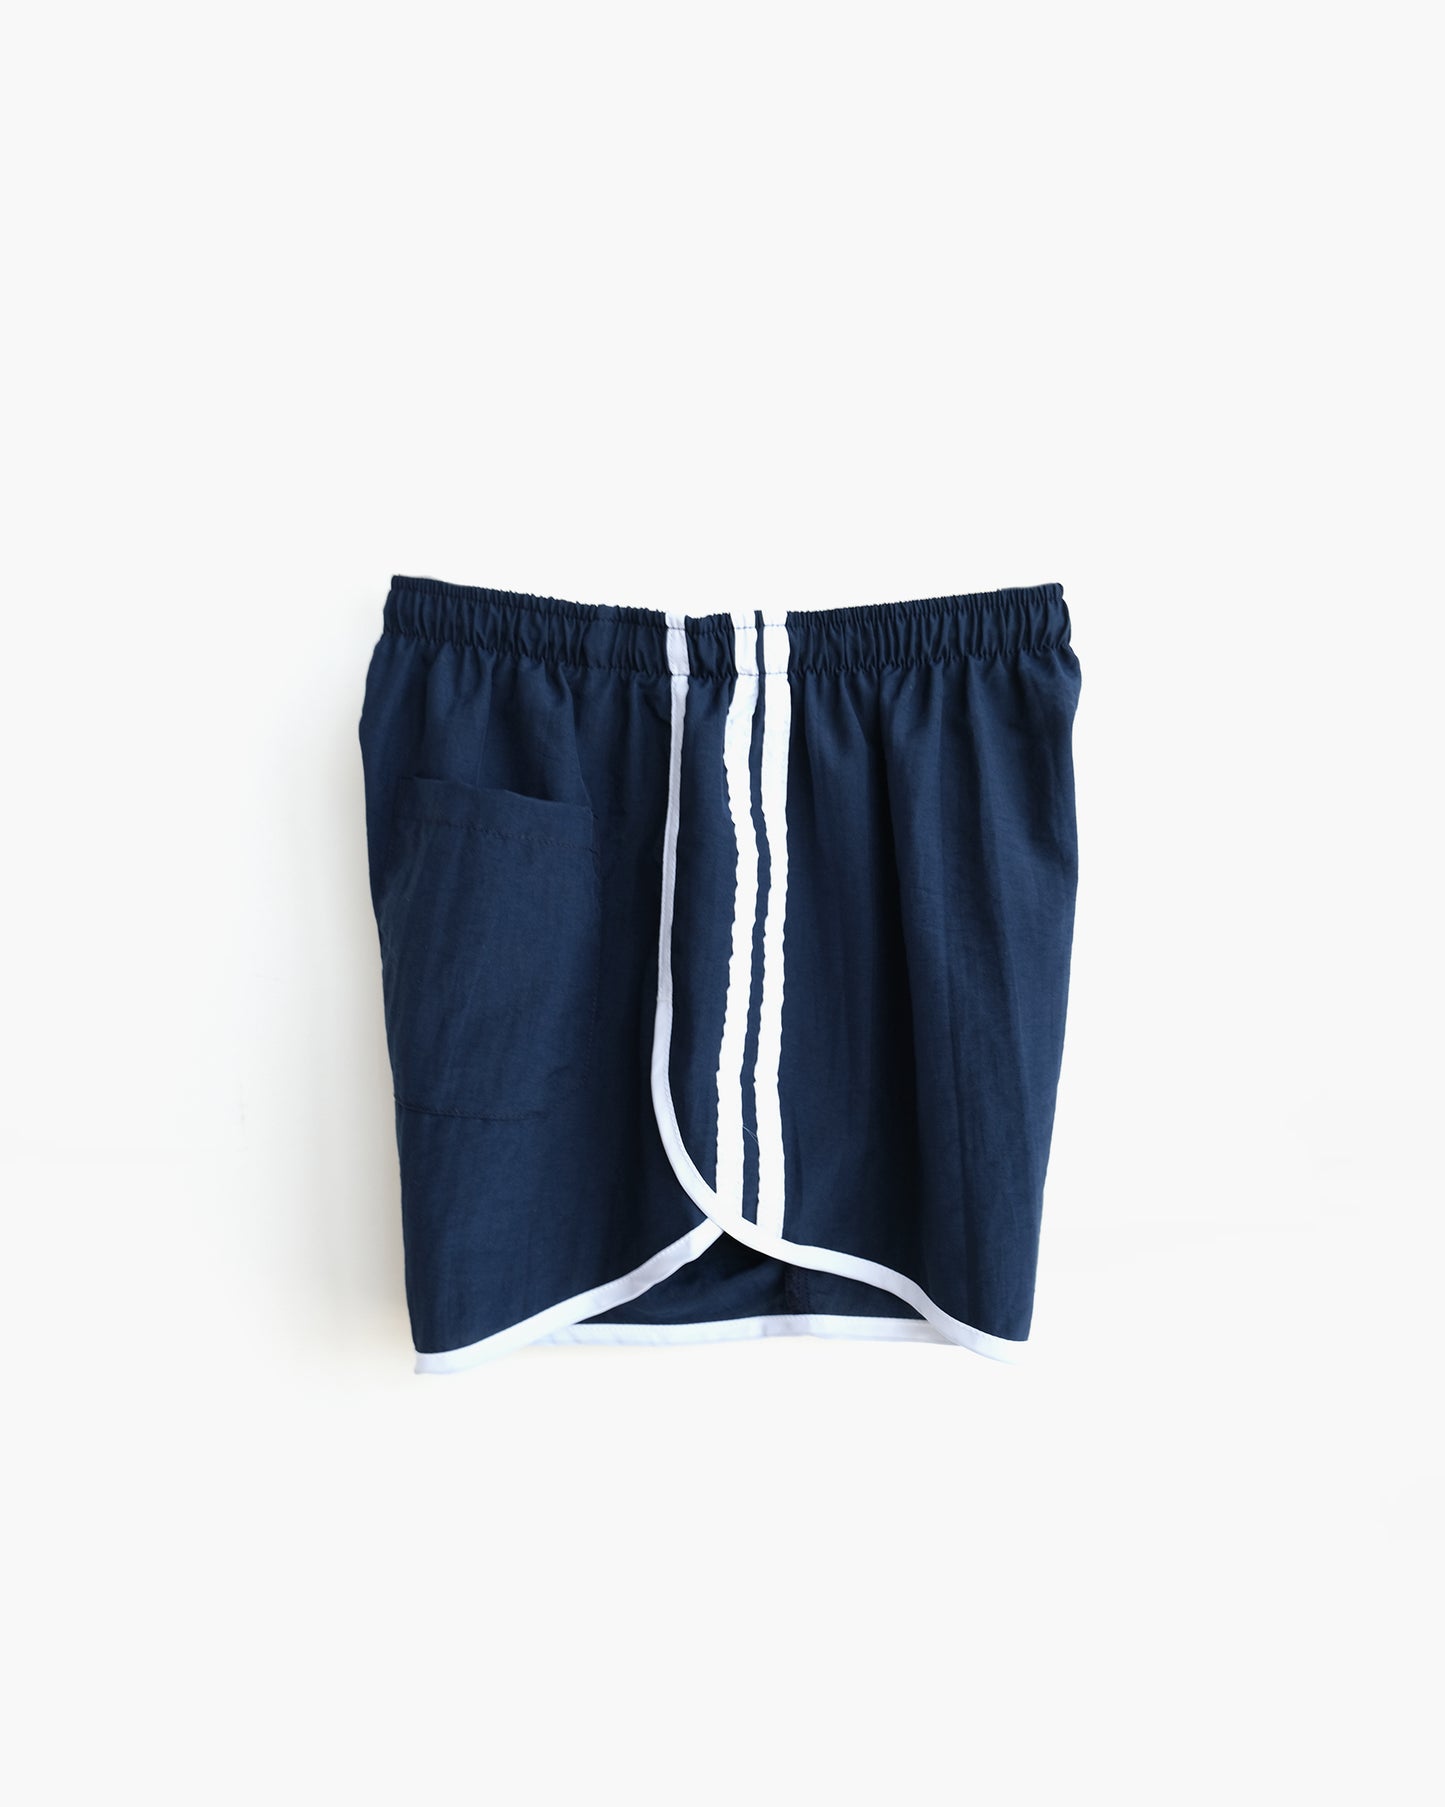 Nylon Gym Shorts Made in France